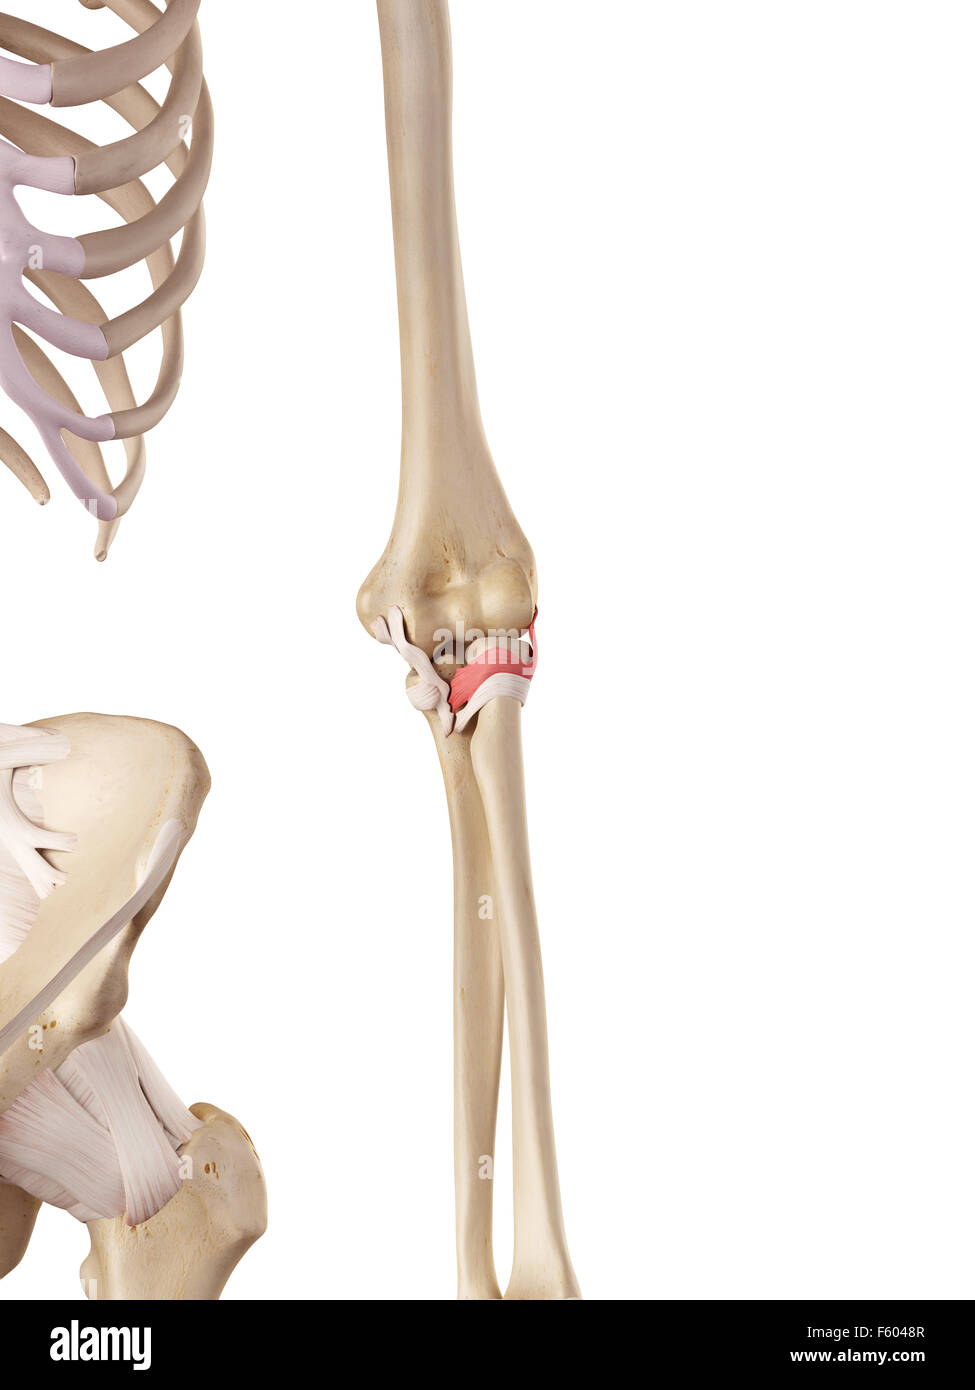 medical accurate illustration of the anterior radiocollateral ligament Stock Photo